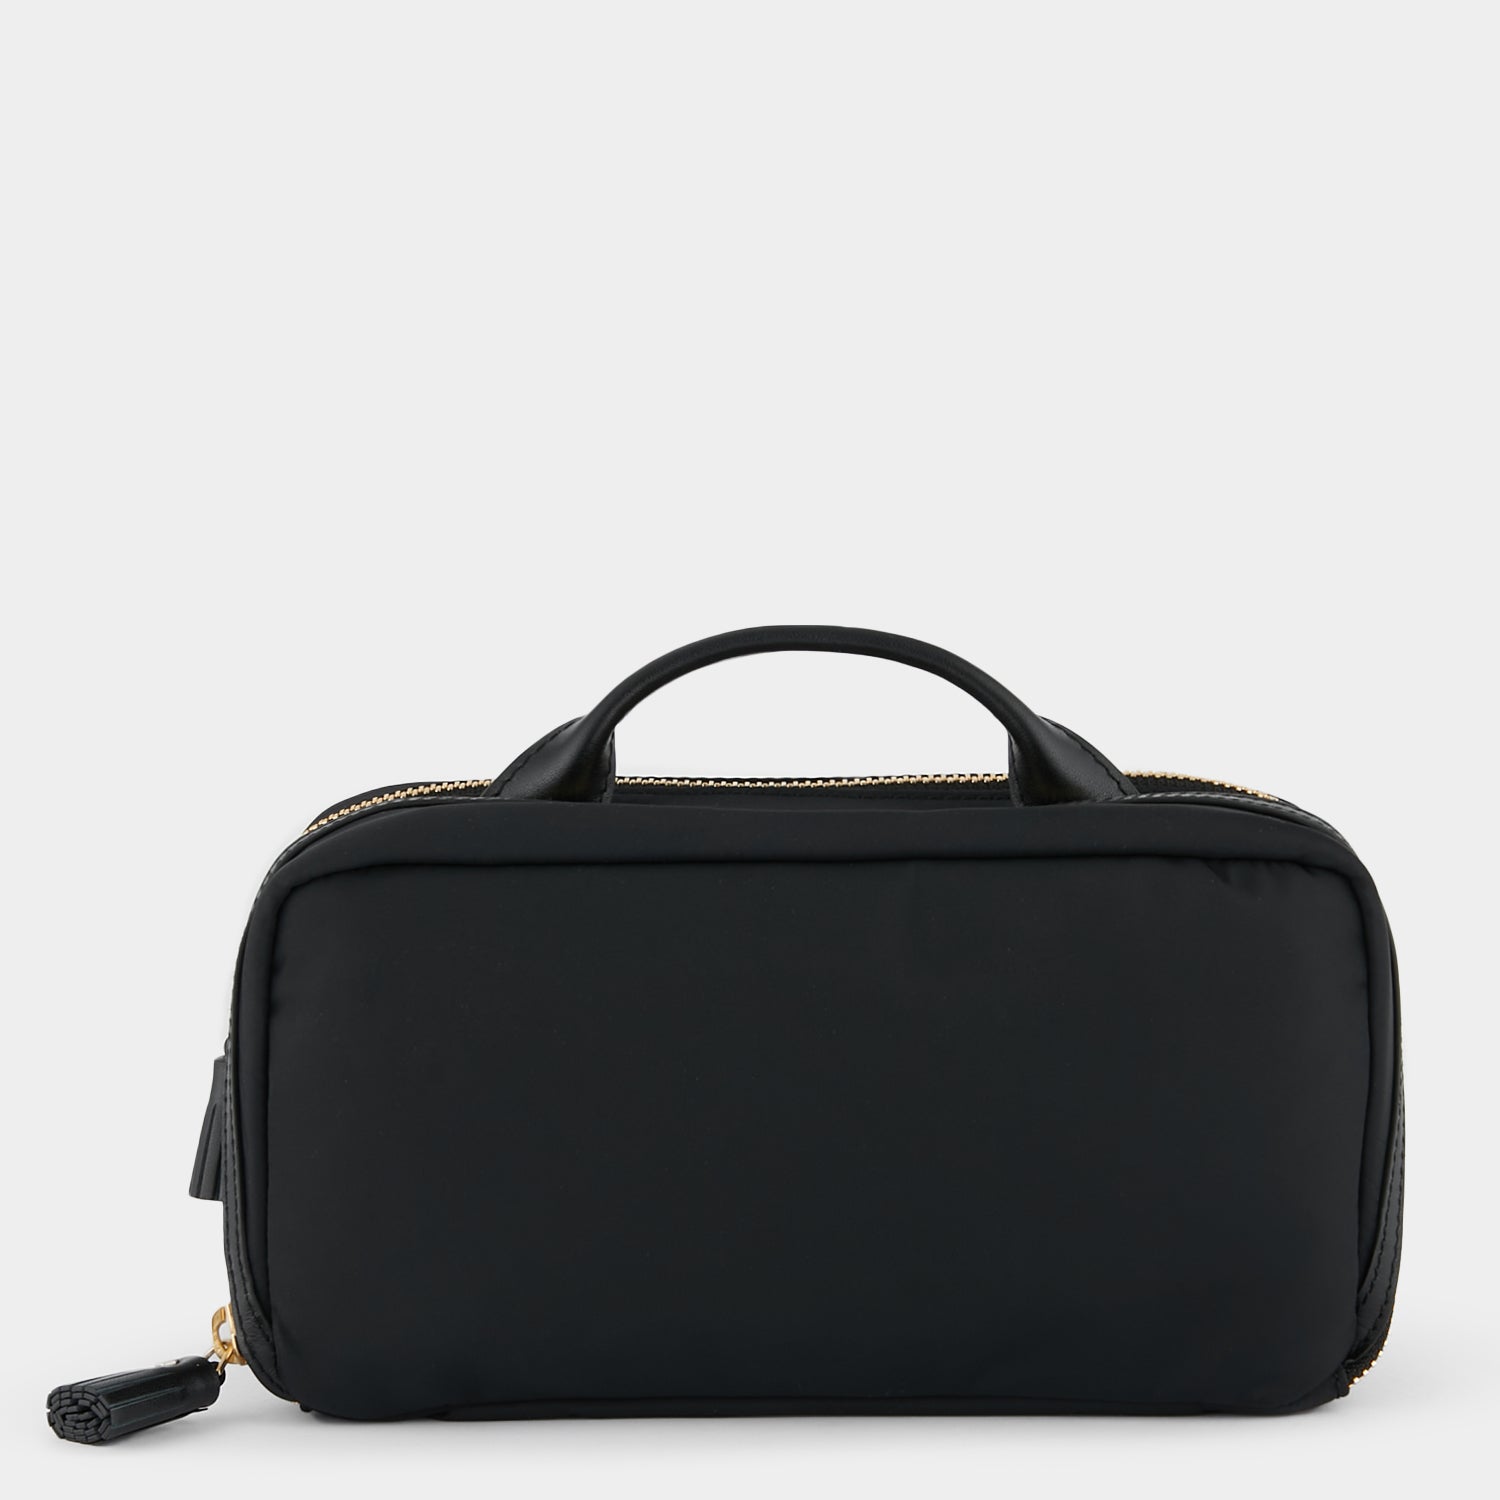 Home Office Pouch -

                  
                    ECONYL® Regenerated Nylon in Black -
                  

                  Anya Hindmarch EU
